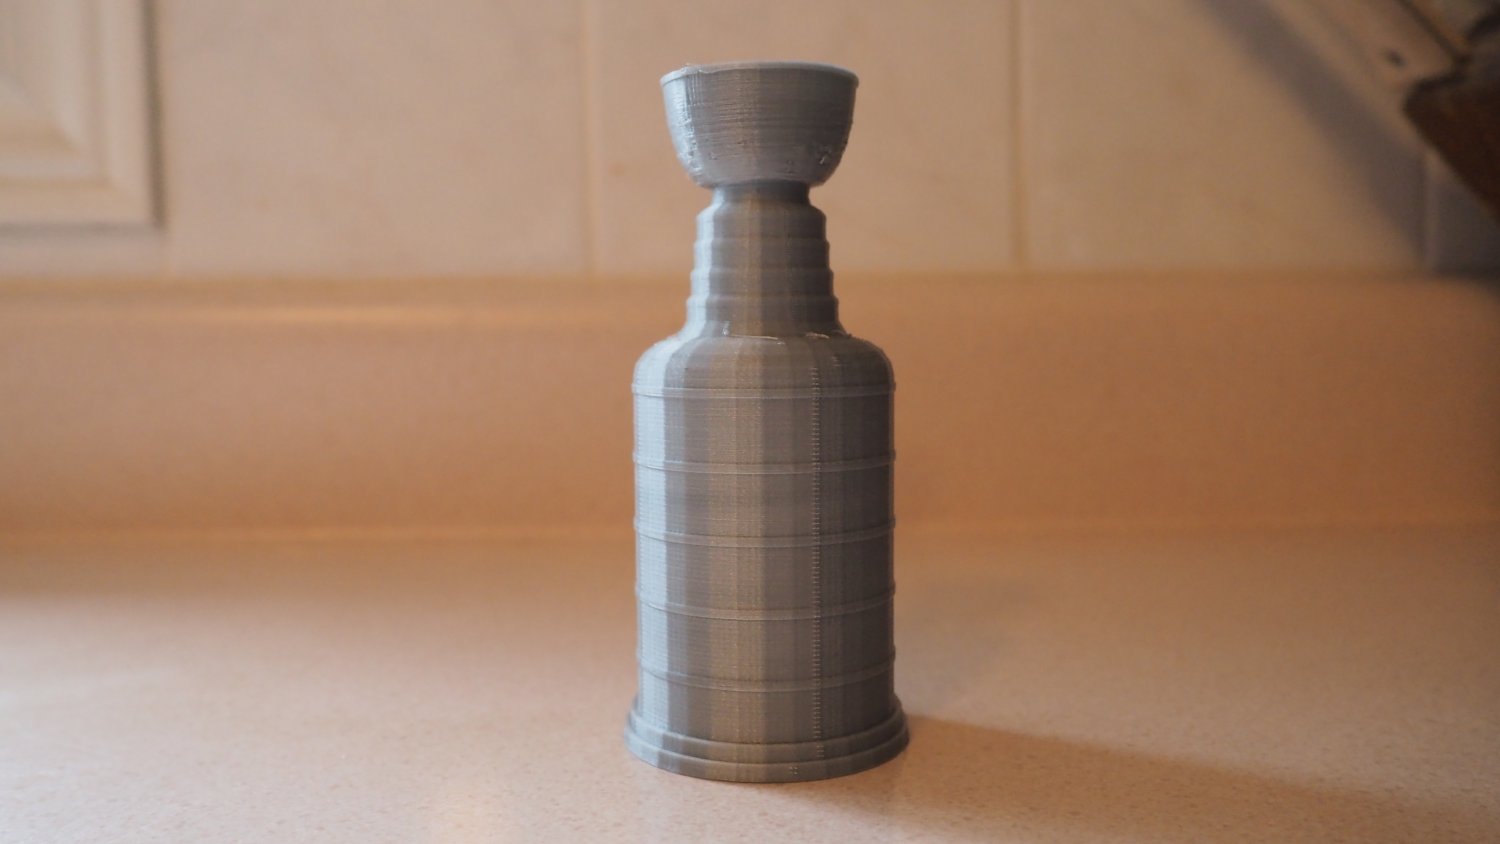 Mini Stanley Drink Cup Decoration by clucknchong, Download free STL model